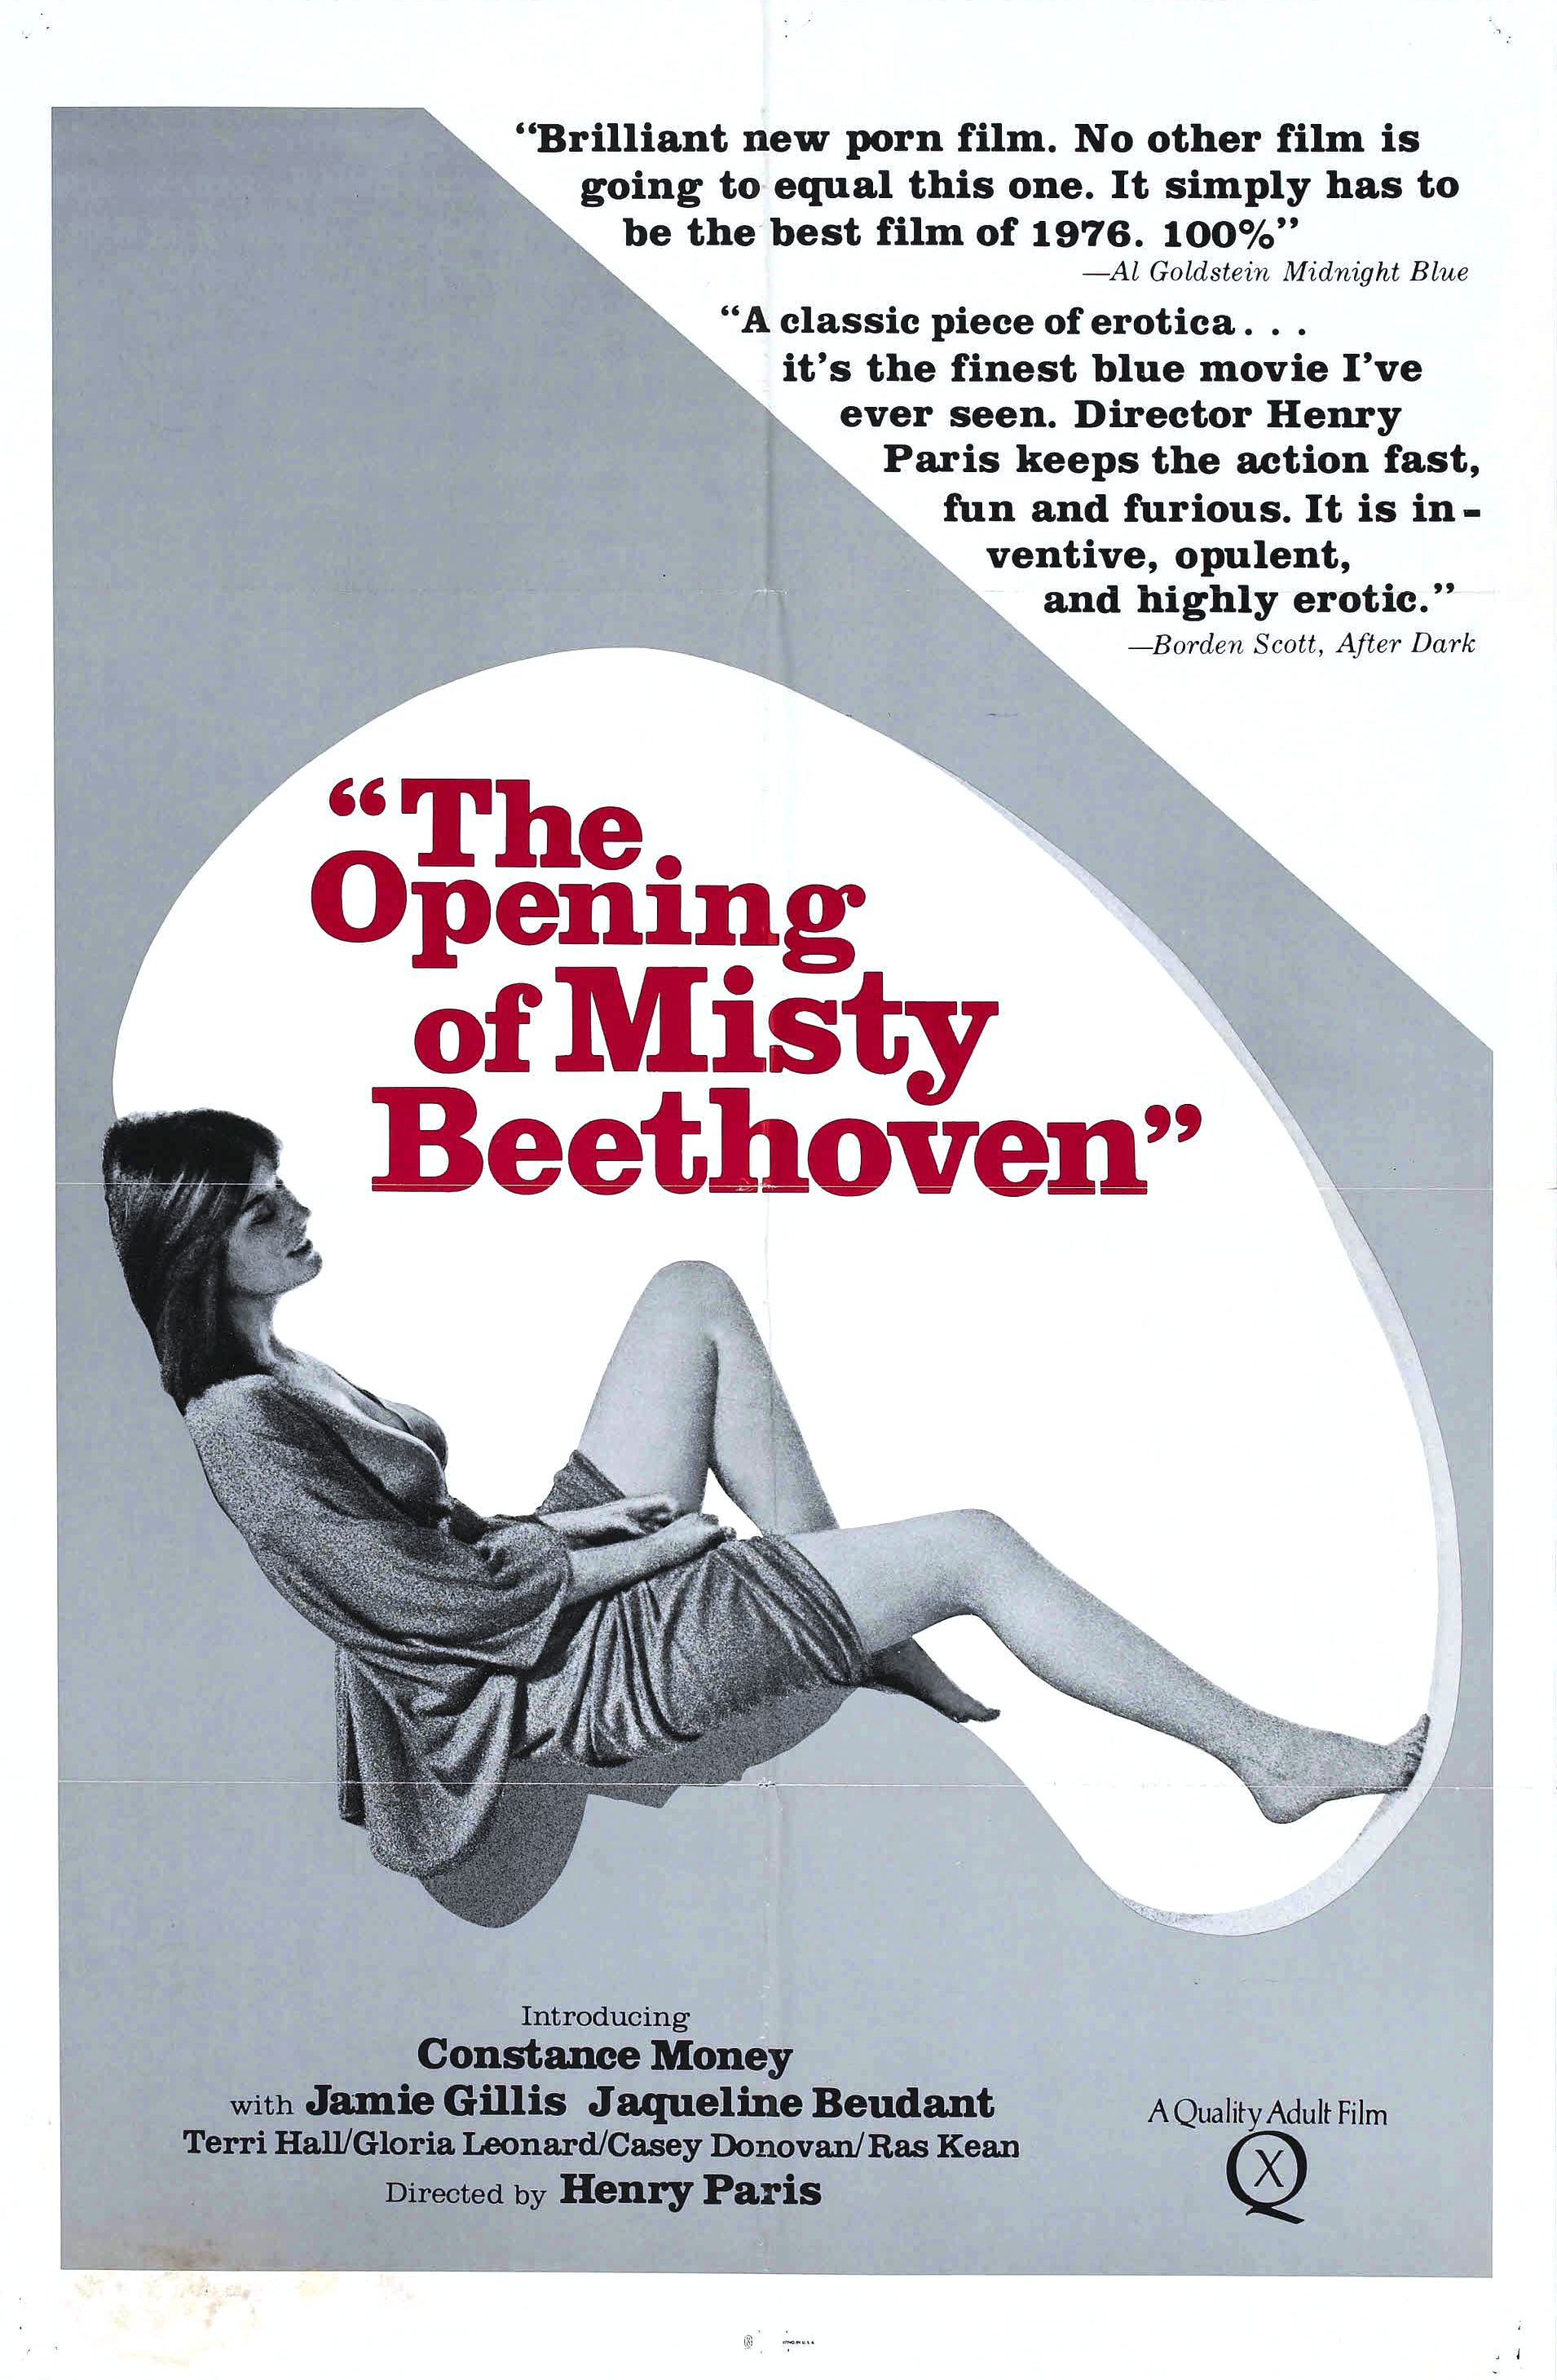 Uhura reccomend opening misty beethoven classic miss